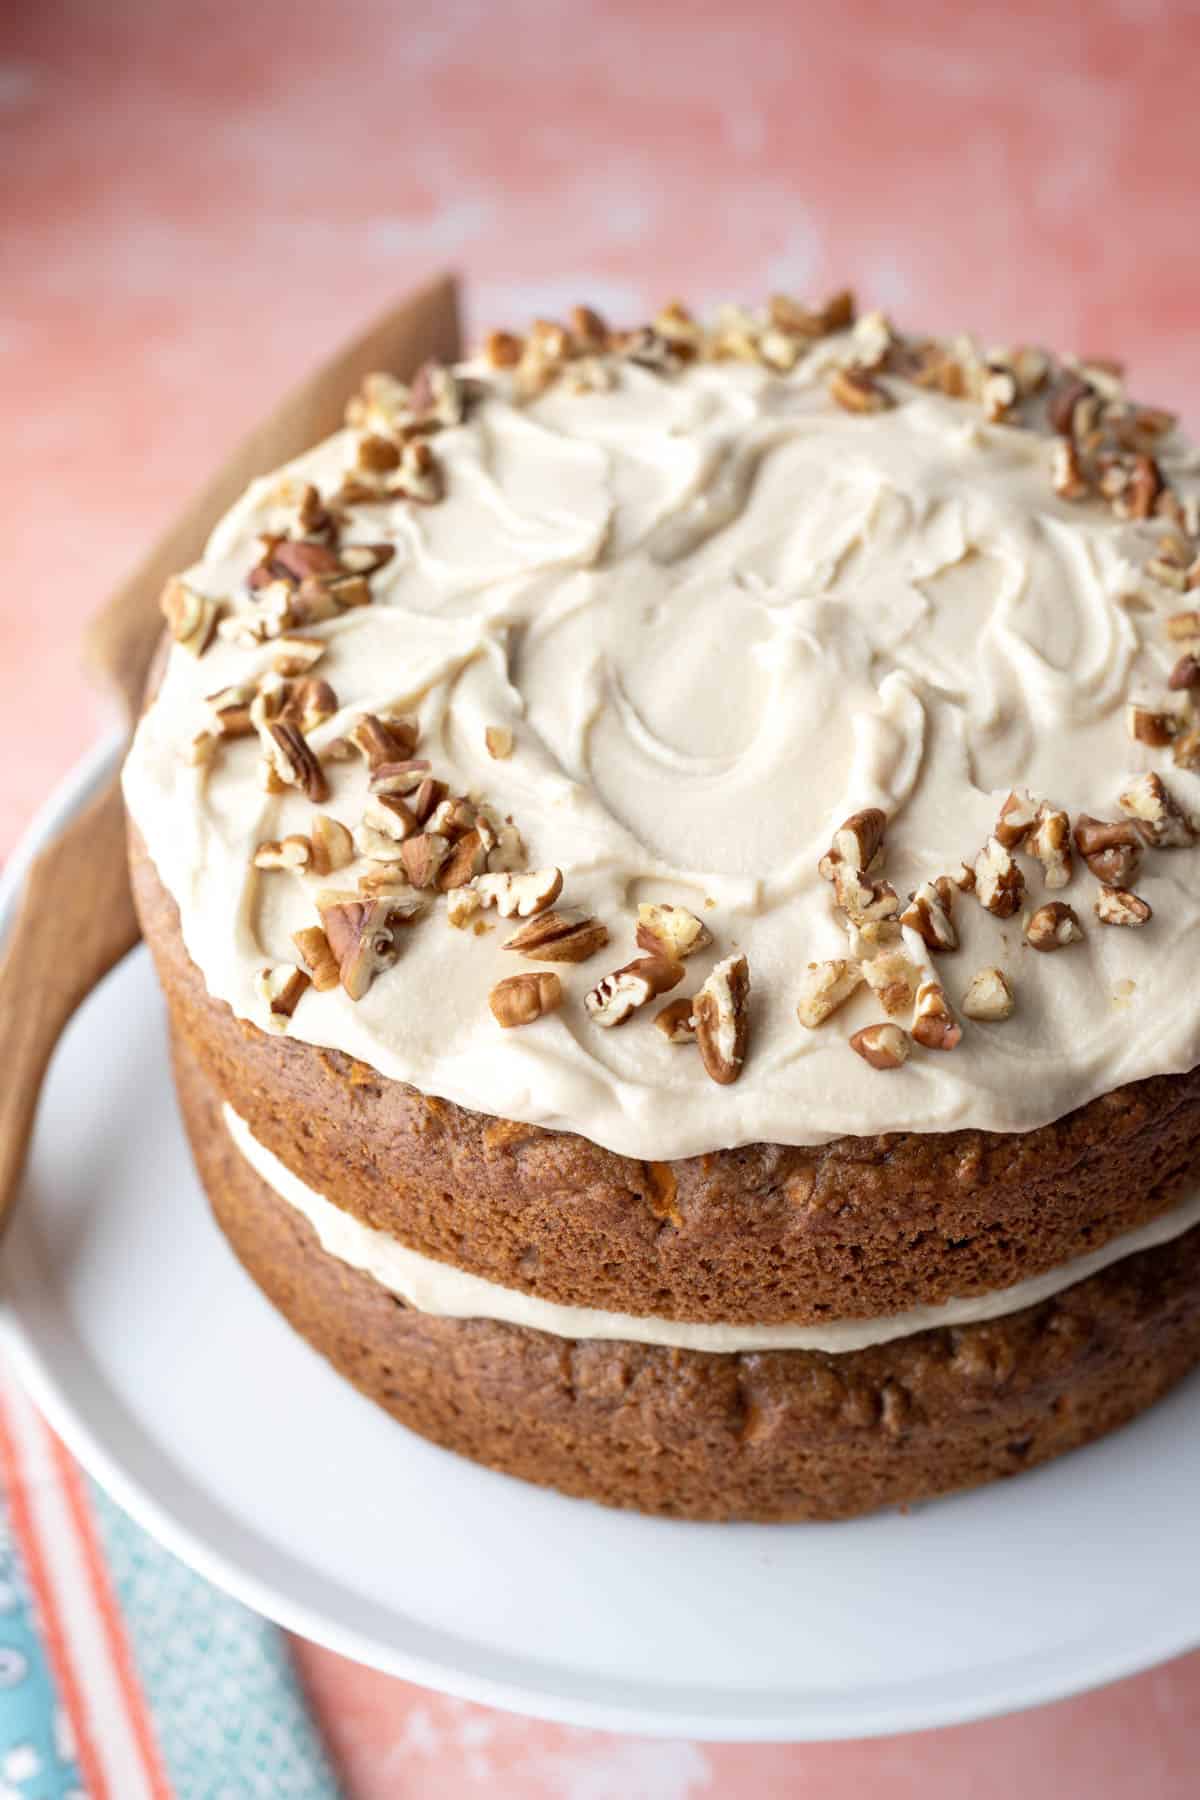 Almond flour frosting spread on top of a vegan carrot cake.